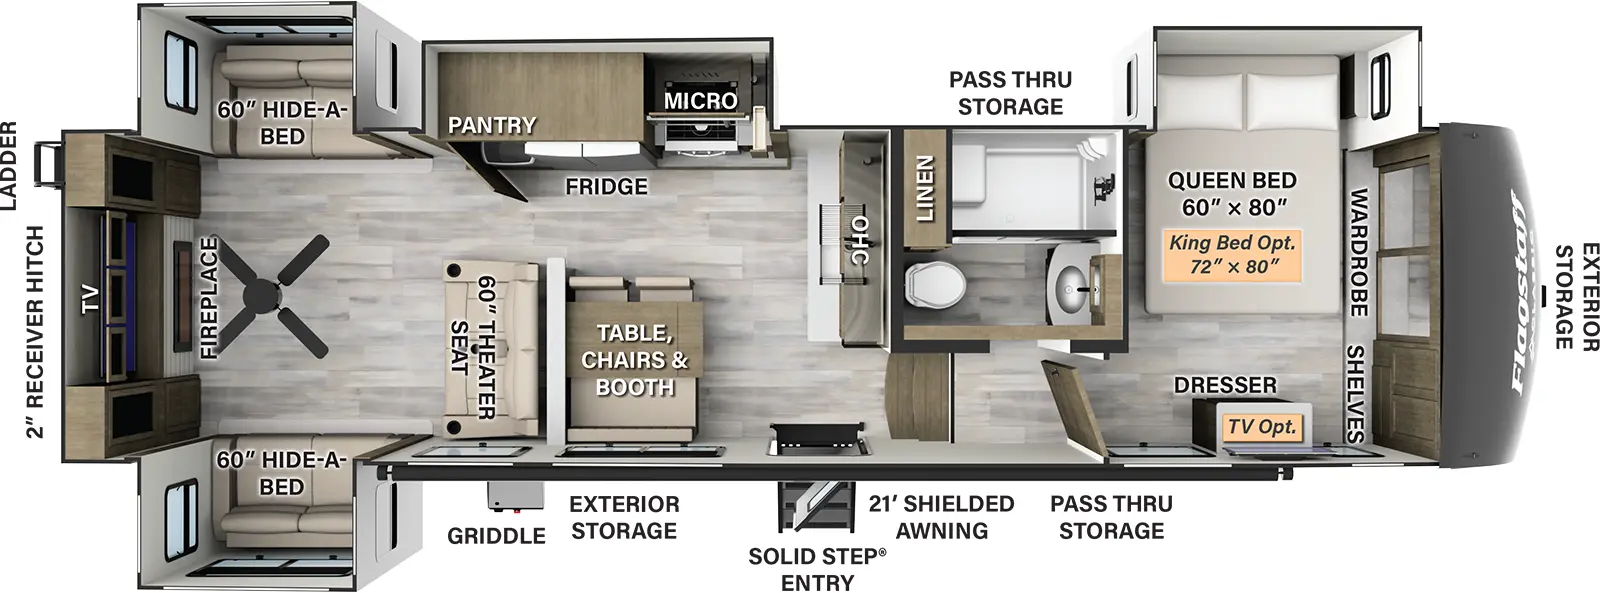 The 375RL has four slides and one entry door. Exterior features a 21 foot shielded awning, solid step entry, pass through storage, exterior storage, griddle, rear ladder, and 2 inch receiver hitch. Interior layout front to back: Queen bed off door side slideout, front wardrobe and shelves, and dresser (optional TV and king bed); side aisle full bathroom with linen closet; steps down to main living area; kitchen counter with sink and overhead cabinet along inner wall; off door side slideout with microwave, cooktop, refrigerator and pantry; door side table, chairs & booth; rear living room with paddle fan, theater seating, opposing hide a bed sofa slideouts, and rear entertainment center with TV and fireplace. 